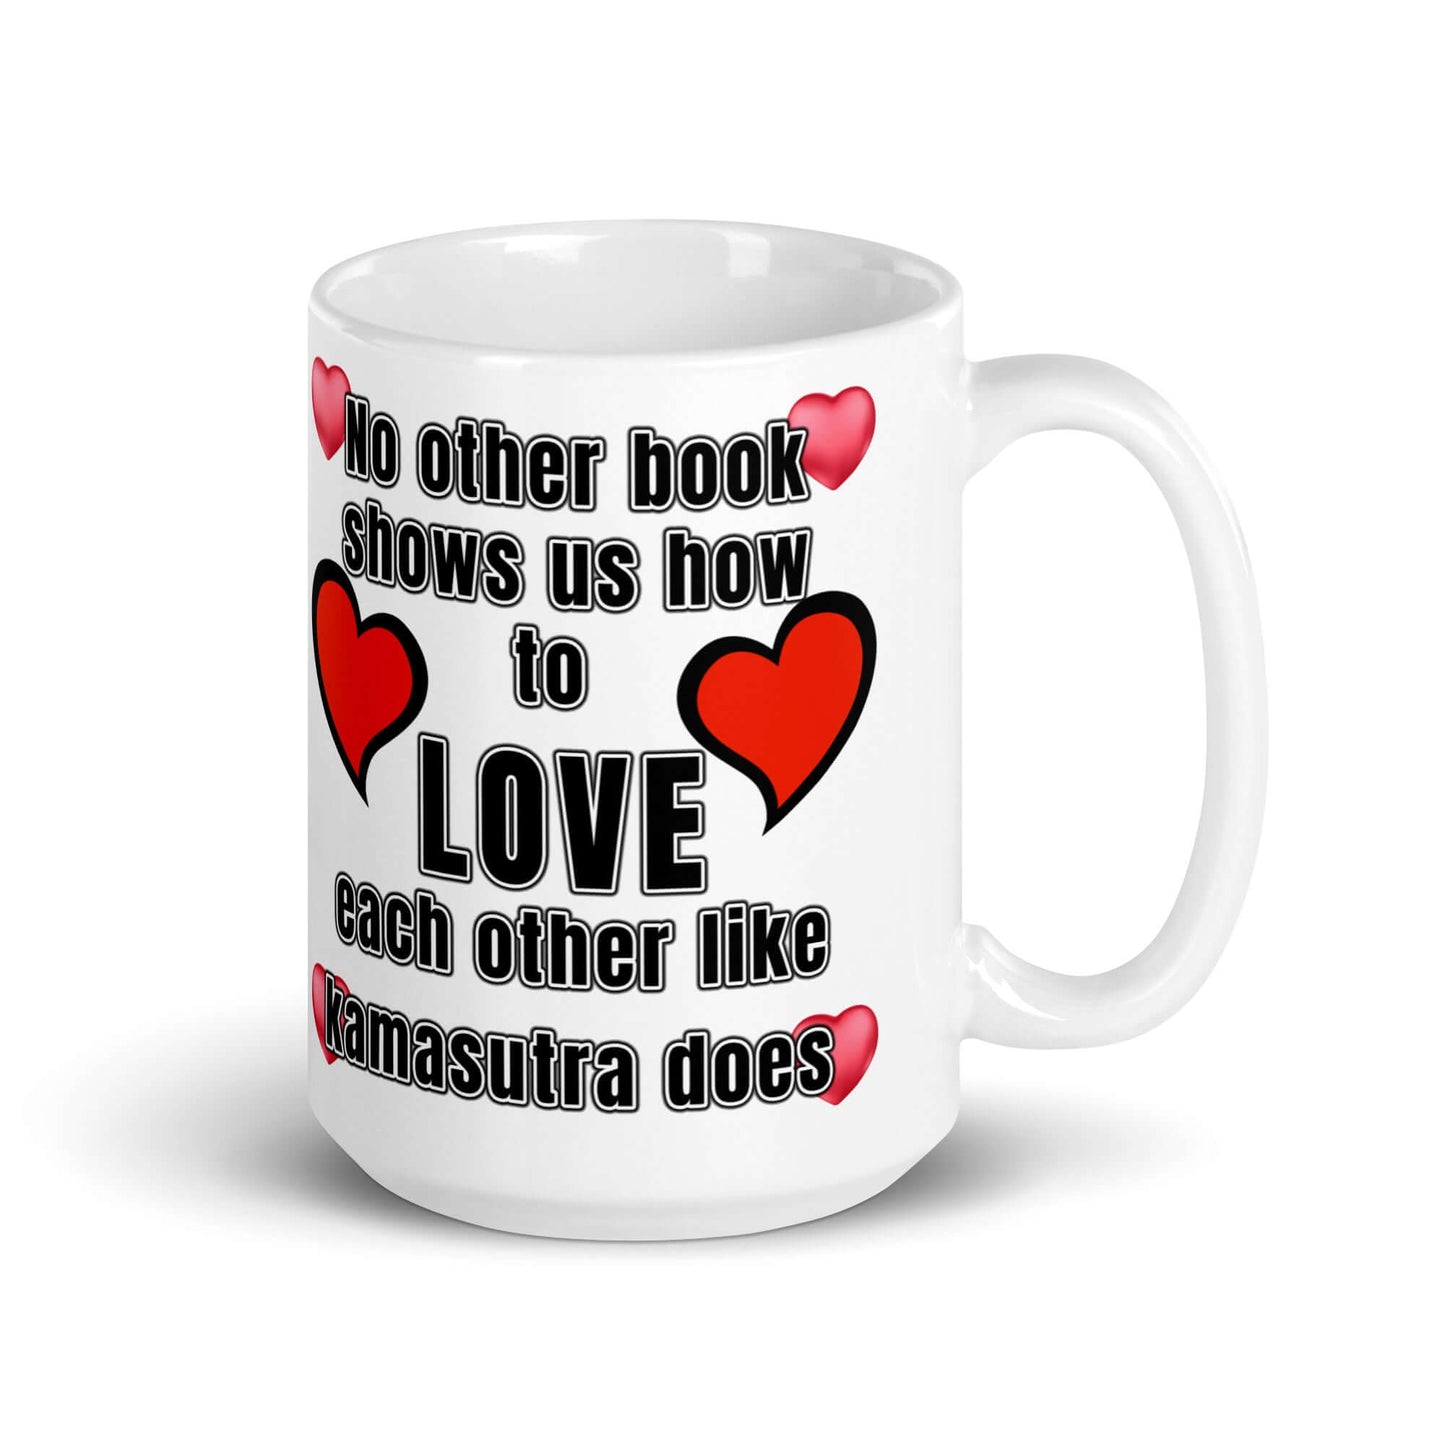 No other book shows us how to love each other like the Kamasutra does - White glossy mug book of love fathers day funny getting laid gift for her kamasutra laid love sex smaking cakes